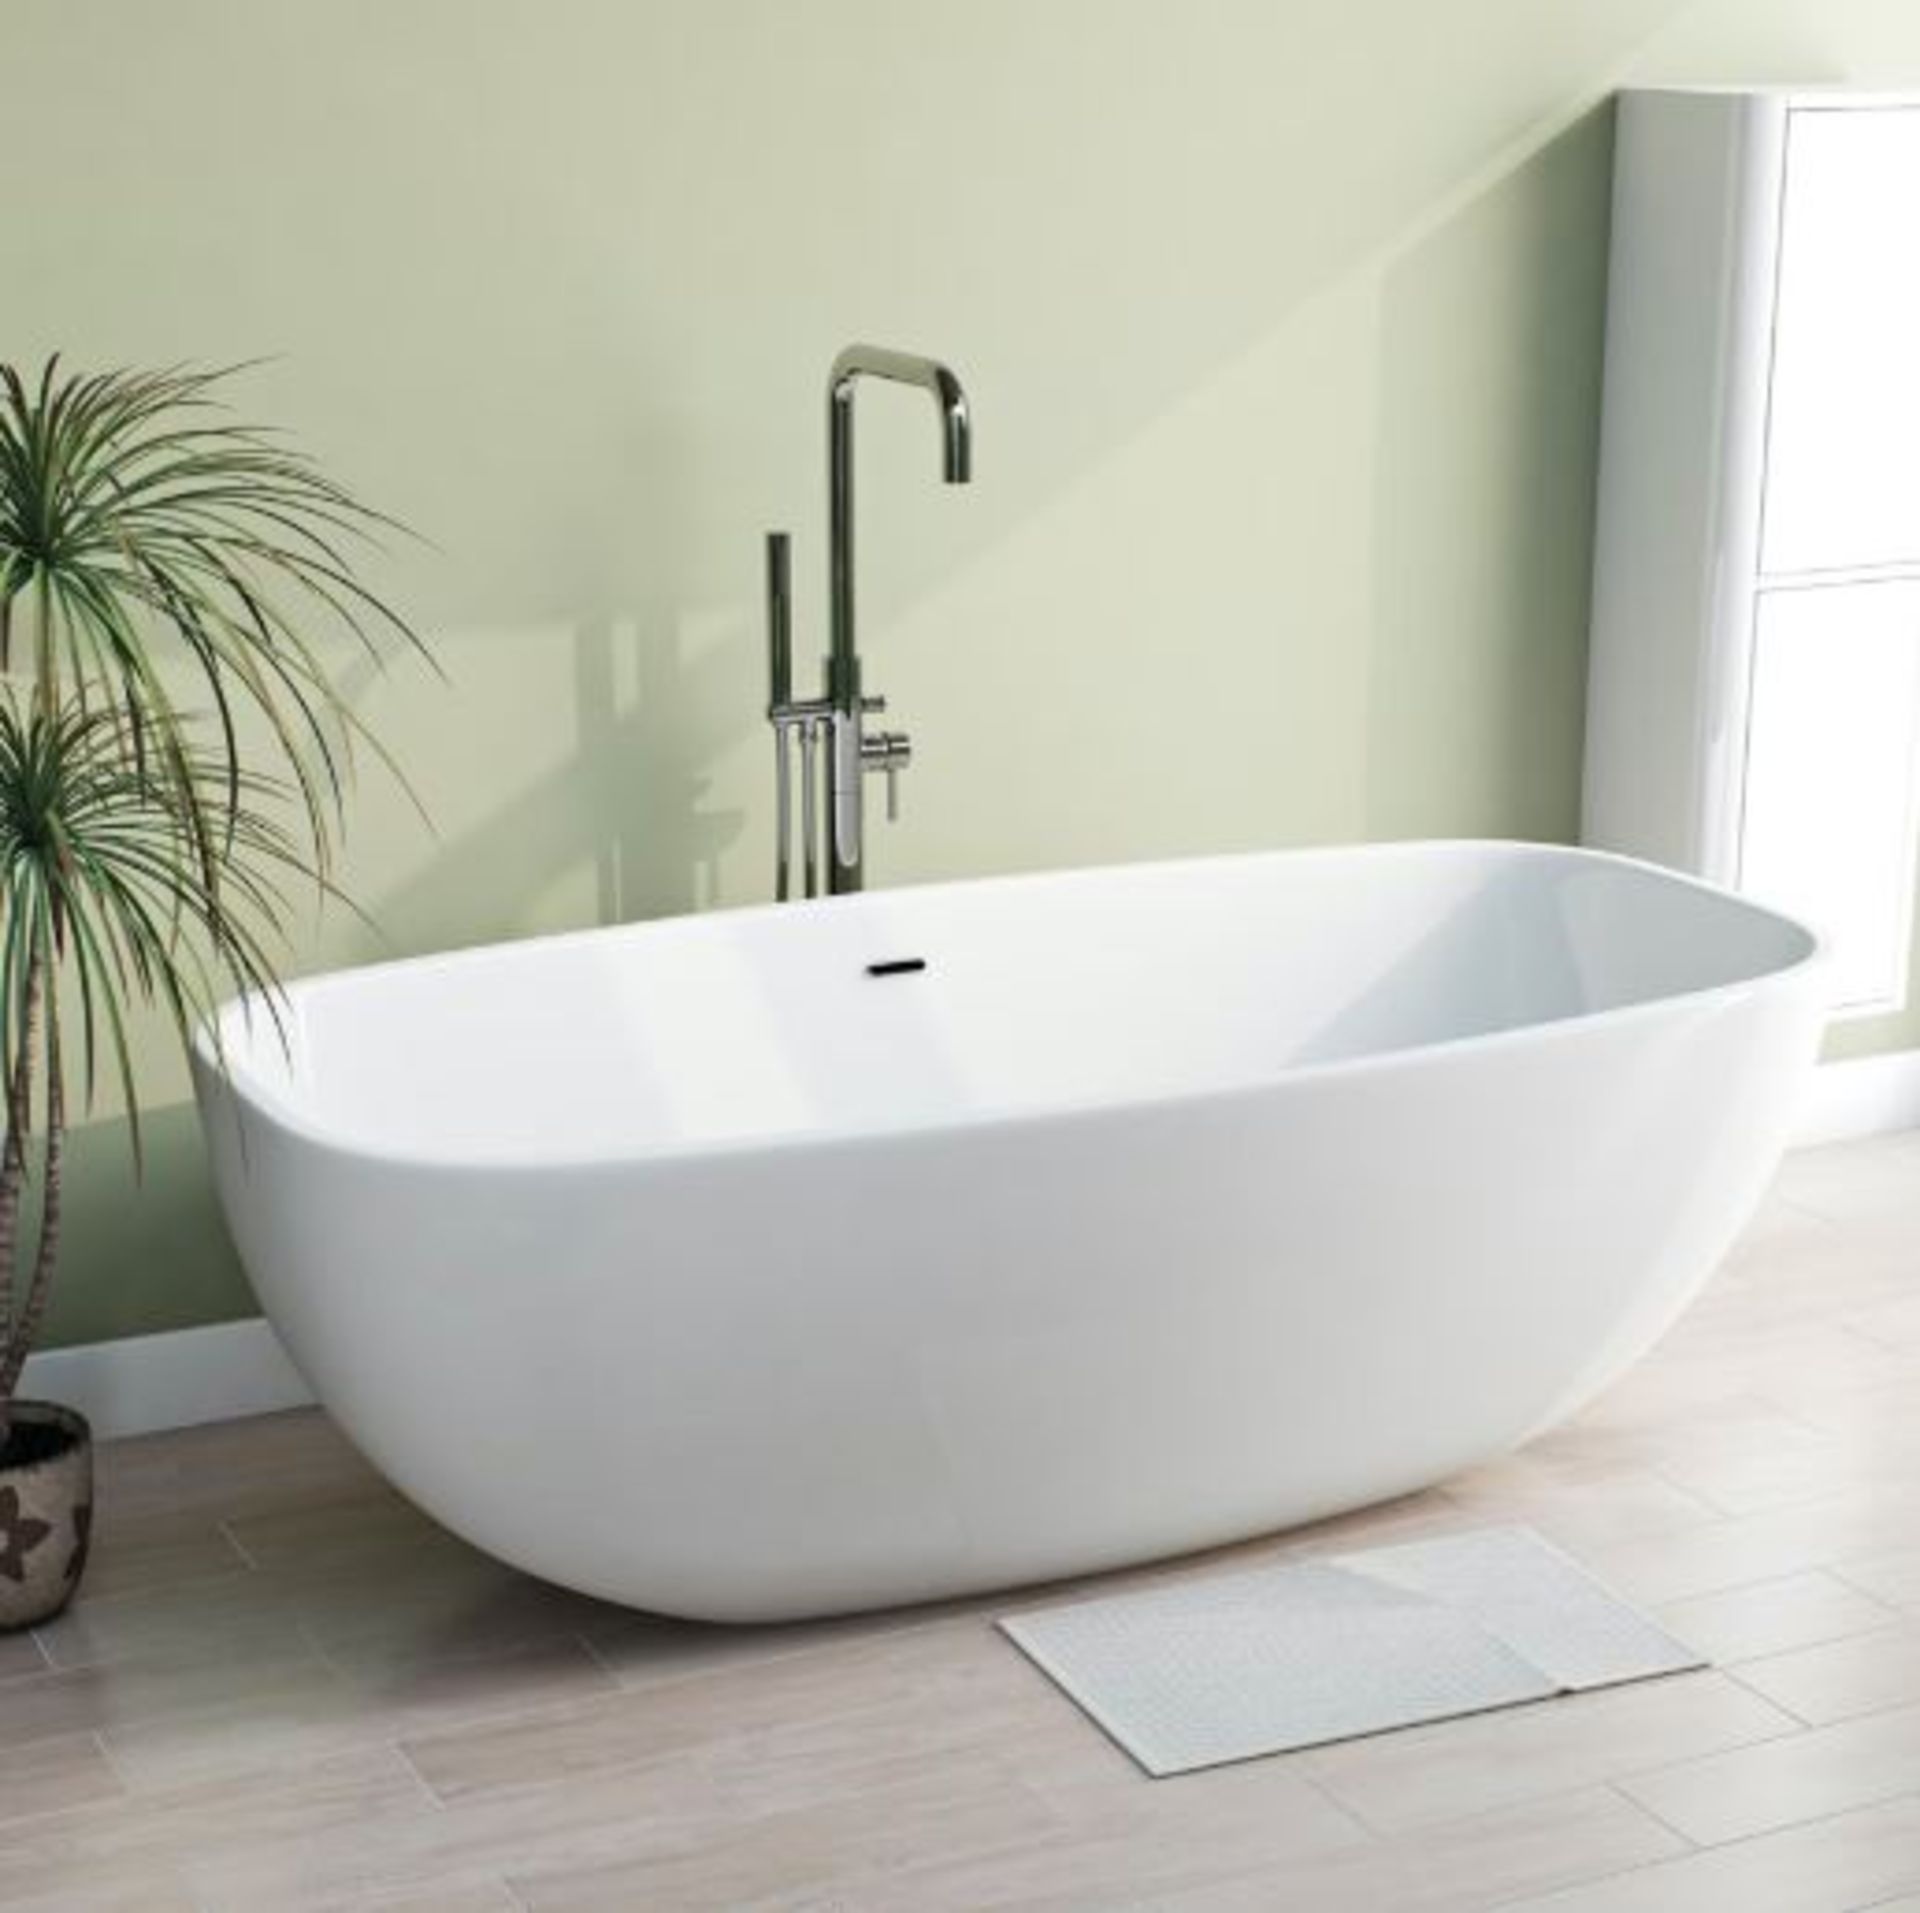 Ellis freestanding bath 1800 x 870mm Appears Unused. Direct From Manufacturers Warehouse